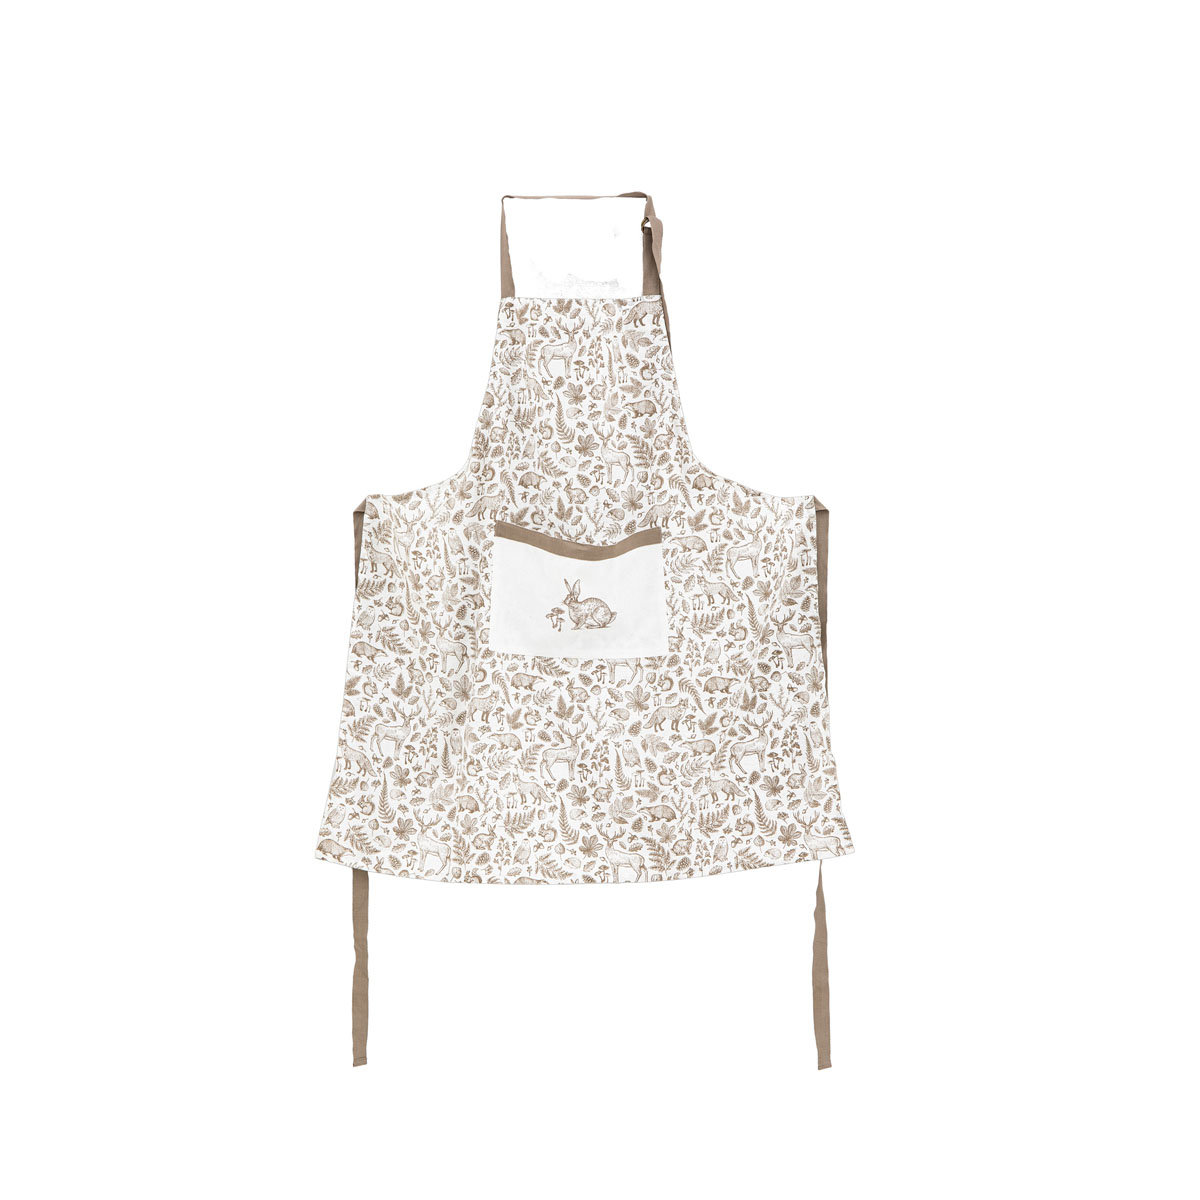 Etched Woodland Apron 850x900mm